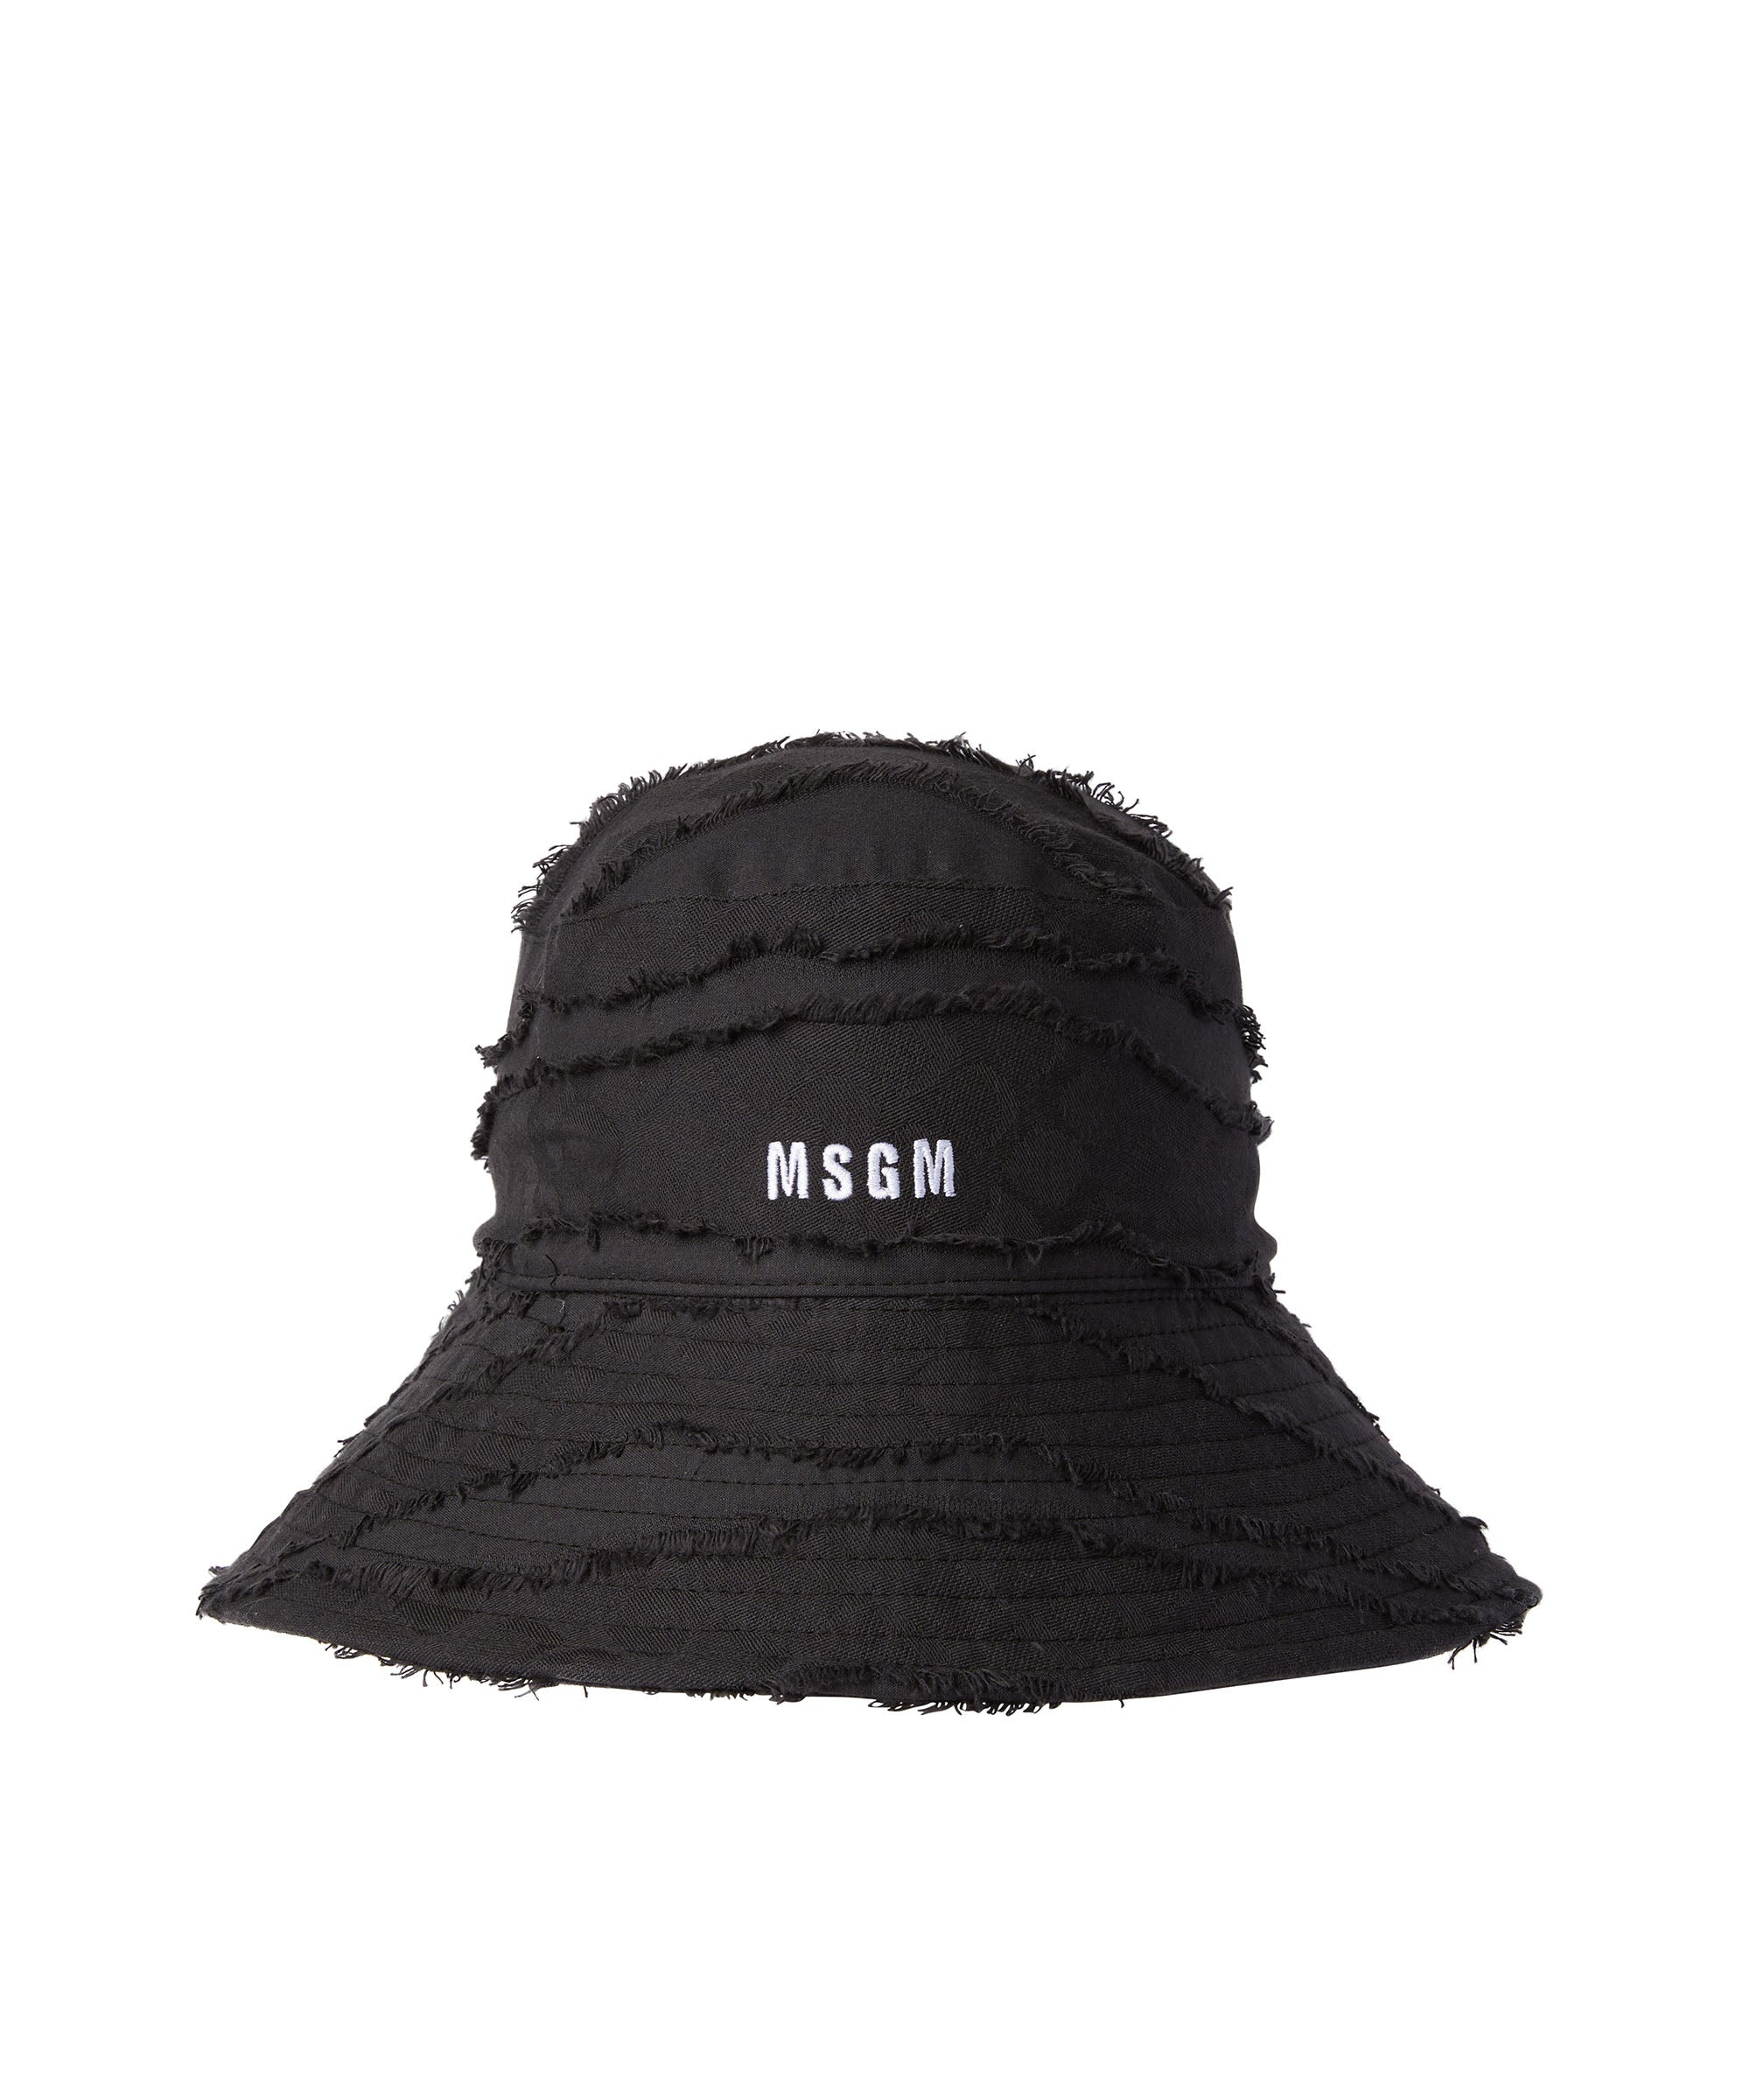 Solid color cotton bucket hat with embroidered MSGM logo - 1